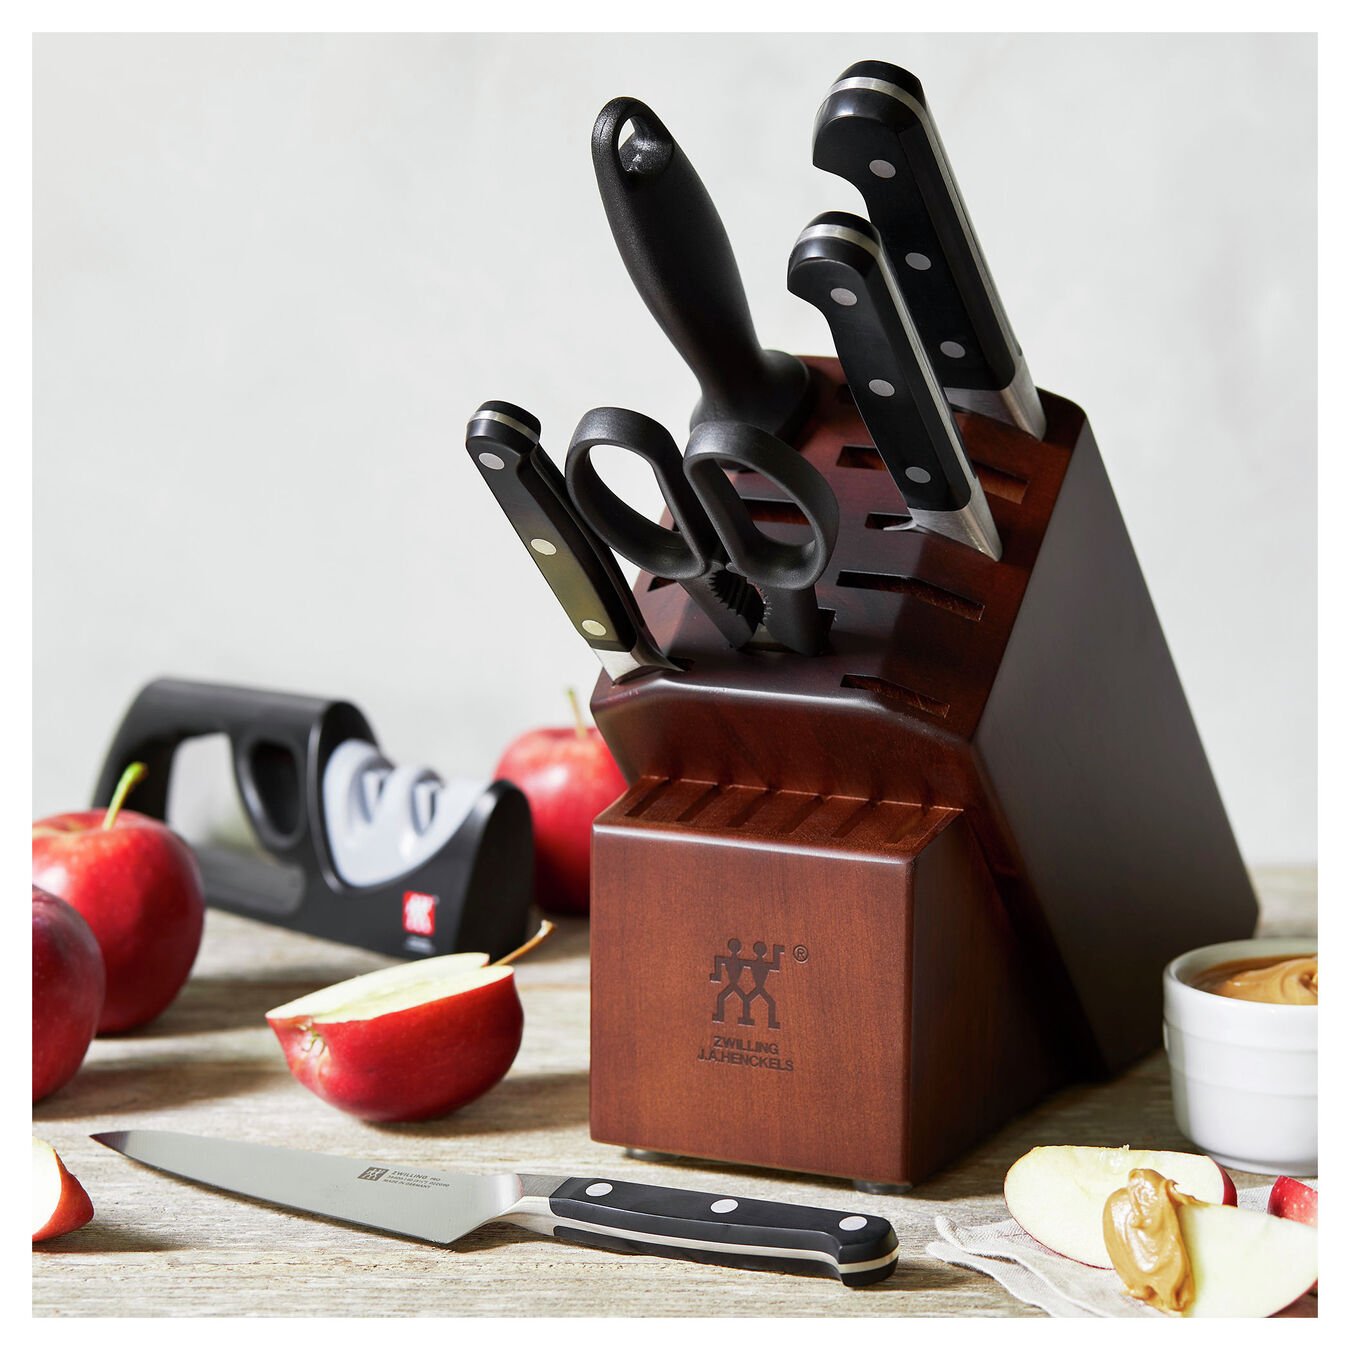 knife block with knives and sharpener on a kitchen countertop with sliced apples.